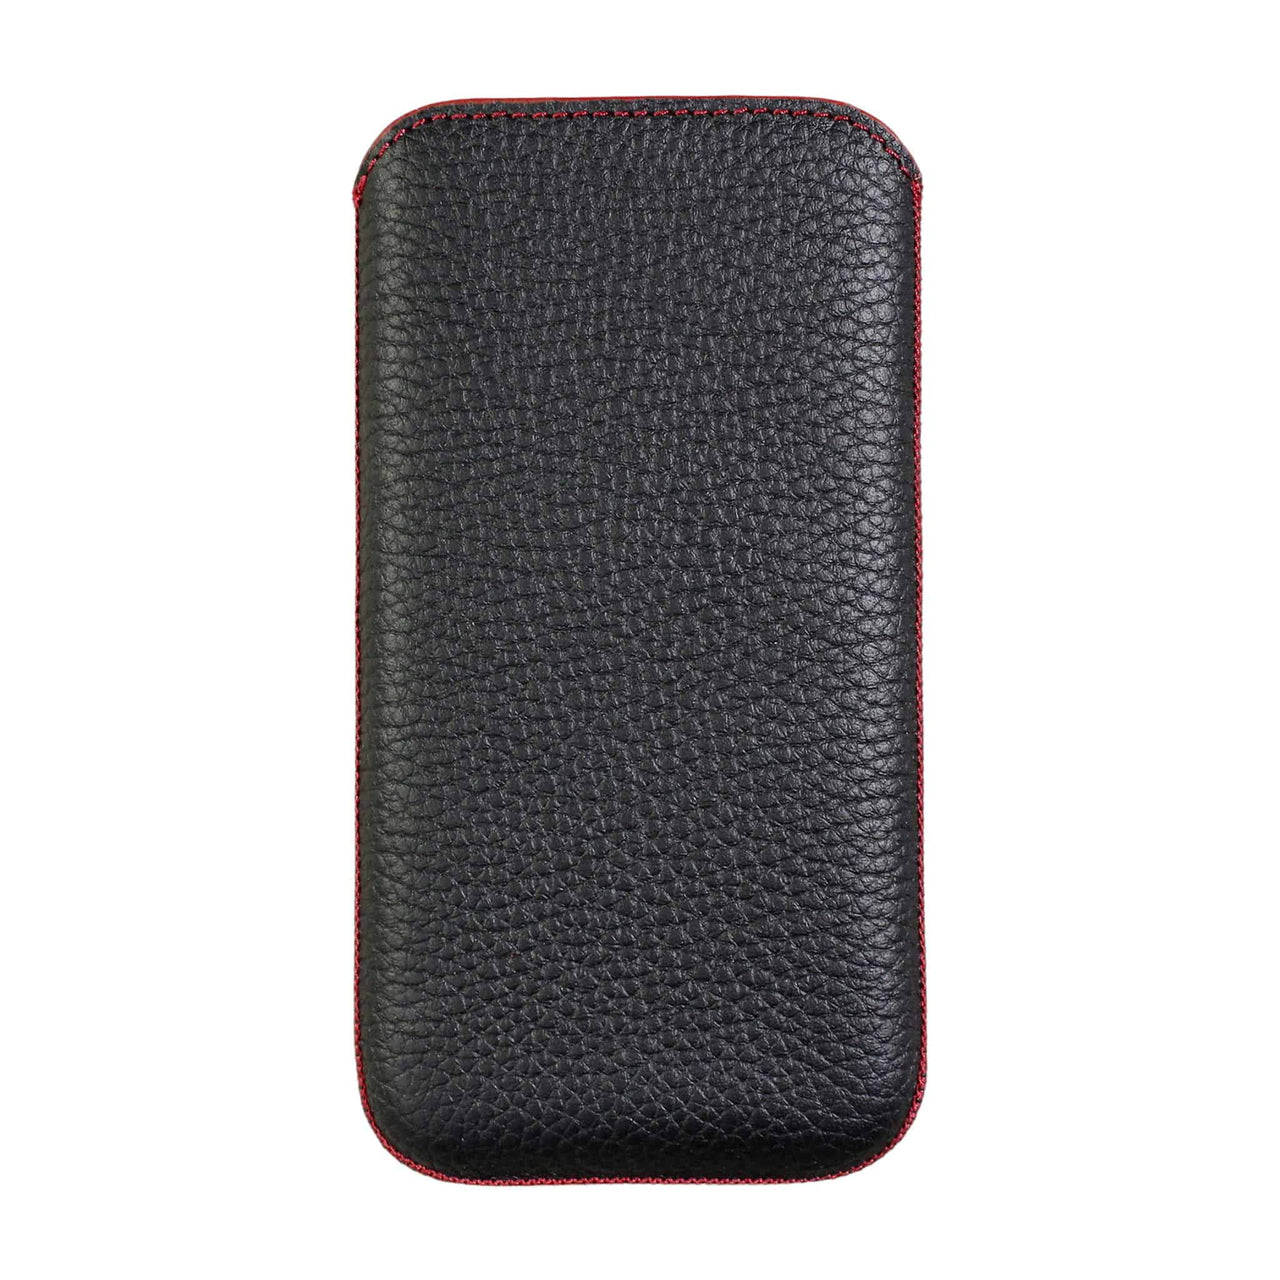 Samsung Galaxy S22 Ultra Genuine Leather Pouch Sleeve Case | Artisanpouch